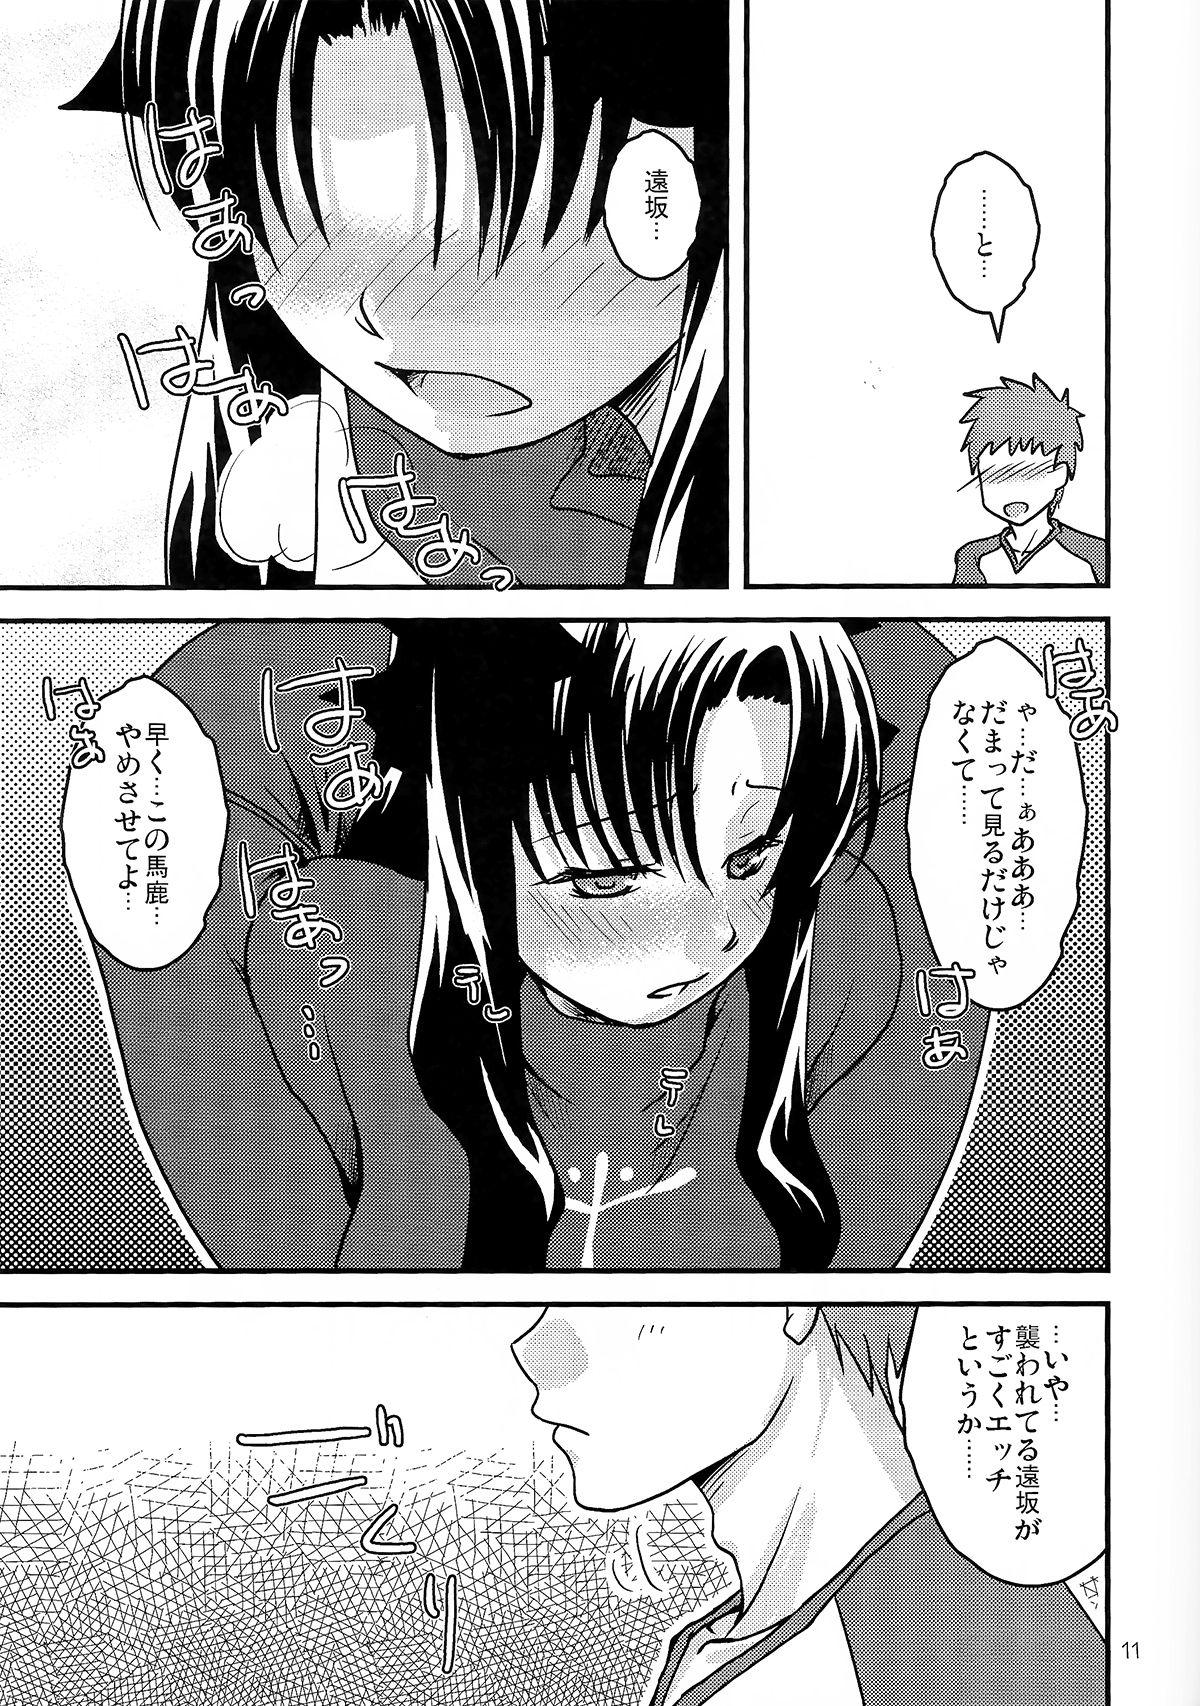 Buceta Fakers - Fate stay night Gay Blackhair - Page 10